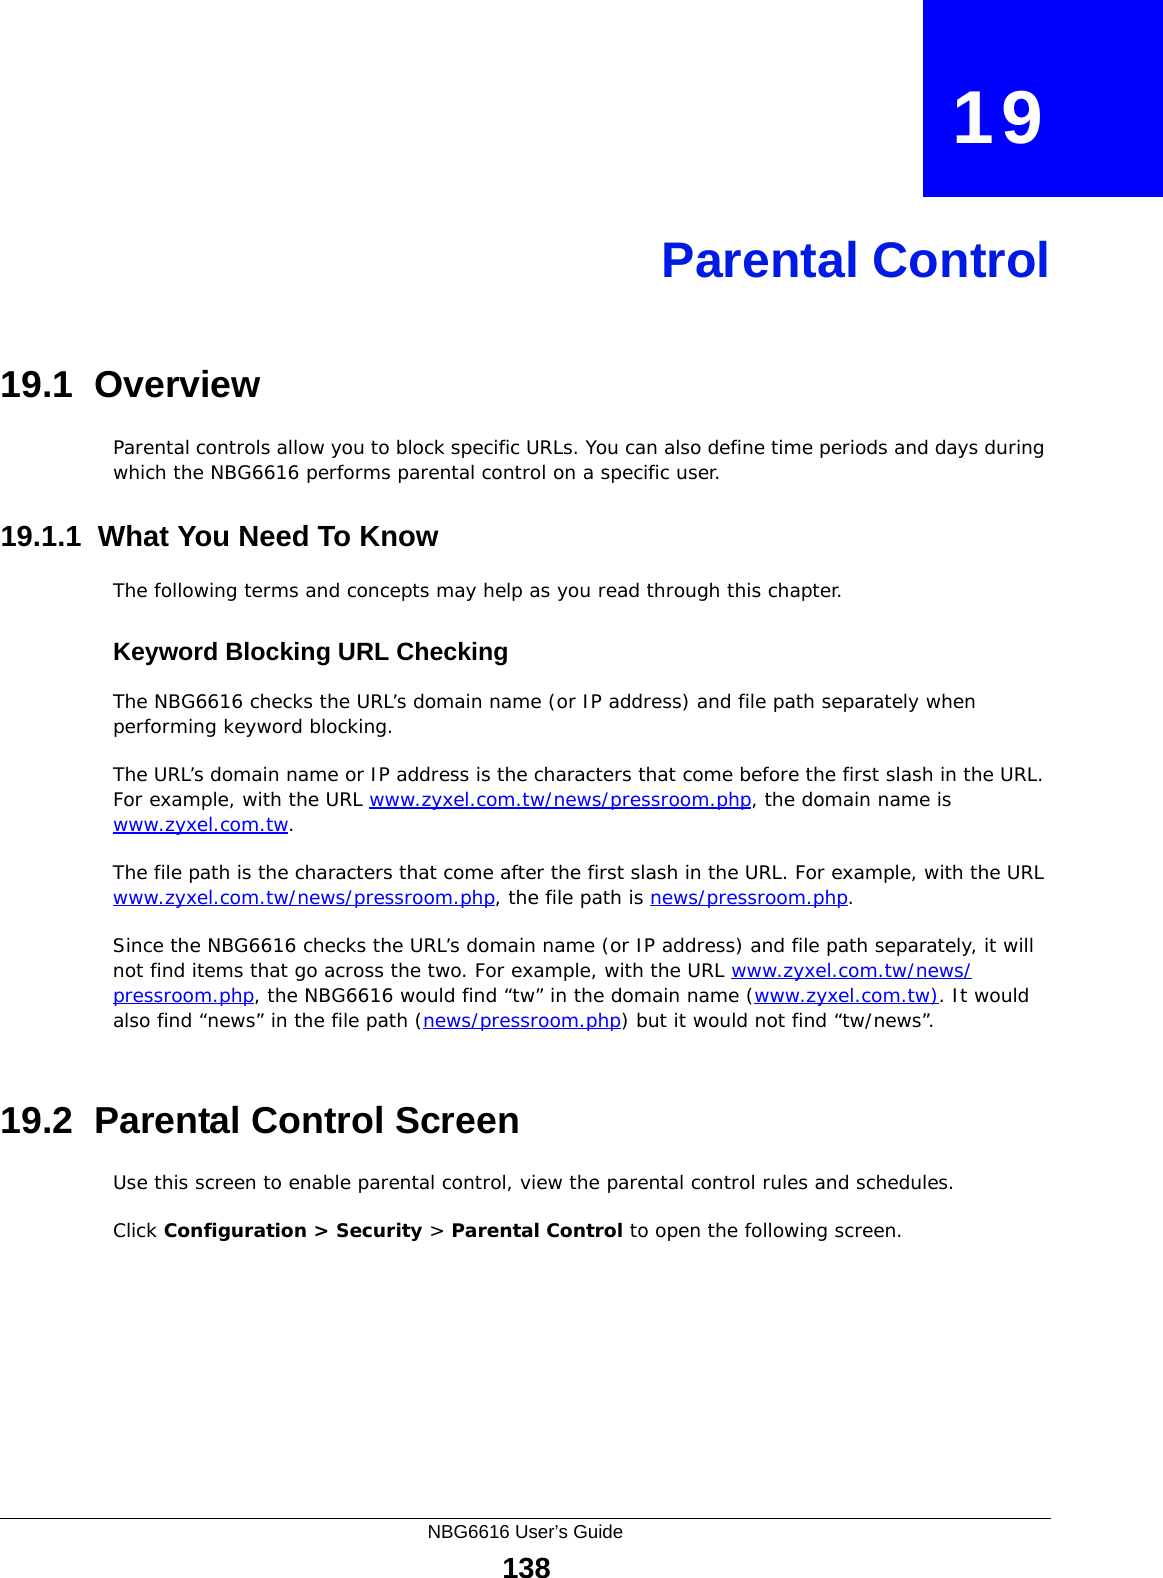 NBG6616 User’s Guide138CHAPTER   19Parental Control19.1  OverviewParental controls allow you to block specific URLs. You can also define time periods and days during which the NBG6616 performs parental control on a specific user. 19.1.1  What You Need To KnowThe following terms and concepts may help as you read through this chapter.Keyword Blocking URL CheckingThe NBG6616 checks the URL’s domain name (or IP address) and file path separately when performing keyword blocking. The URL’s domain name or IP address is the characters that come before the first slash in the URL. For example, with the URL www.zyxel.com.tw/news/pressroom.php, the domain name is www.zyxel.com.tw.The file path is the characters that come after the first slash in the URL. For example, with the URL www.zyxel.com.tw/news/pressroom.php, the file path is news/pressroom.php.Since the NBG6616 checks the URL’s domain name (or IP address) and file path separately, it will not find items that go across the two. For example, with the URL www.zyxel.com.tw/news/pressroom.php, the NBG6616 would find “tw” in the domain name (www.zyxel.com.tw). It would also find “news” in the file path (news/pressroom.php) but it would not find “tw/news”.19.2  Parental Control ScreenUse this screen to enable parental control, view the parental control rules and schedules.Click Configuration &gt; Security &gt; Parental Control to open the following screen. 